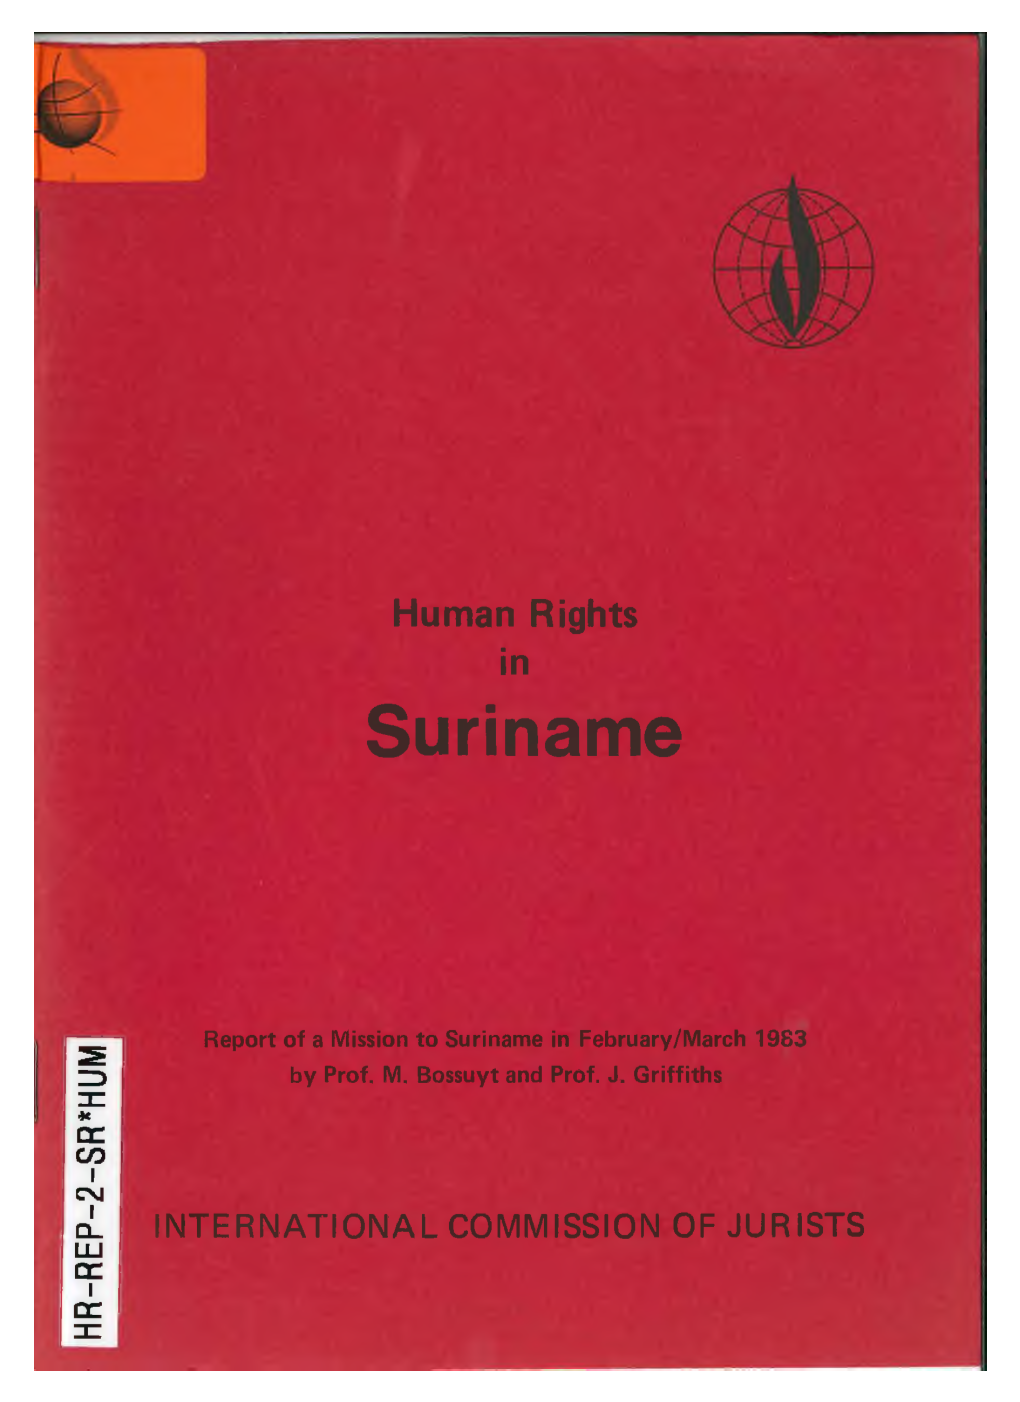 Suriname in February/Sviarch 1983 1983 February/Sviarch in Suriname to Mission a of Report Ypo